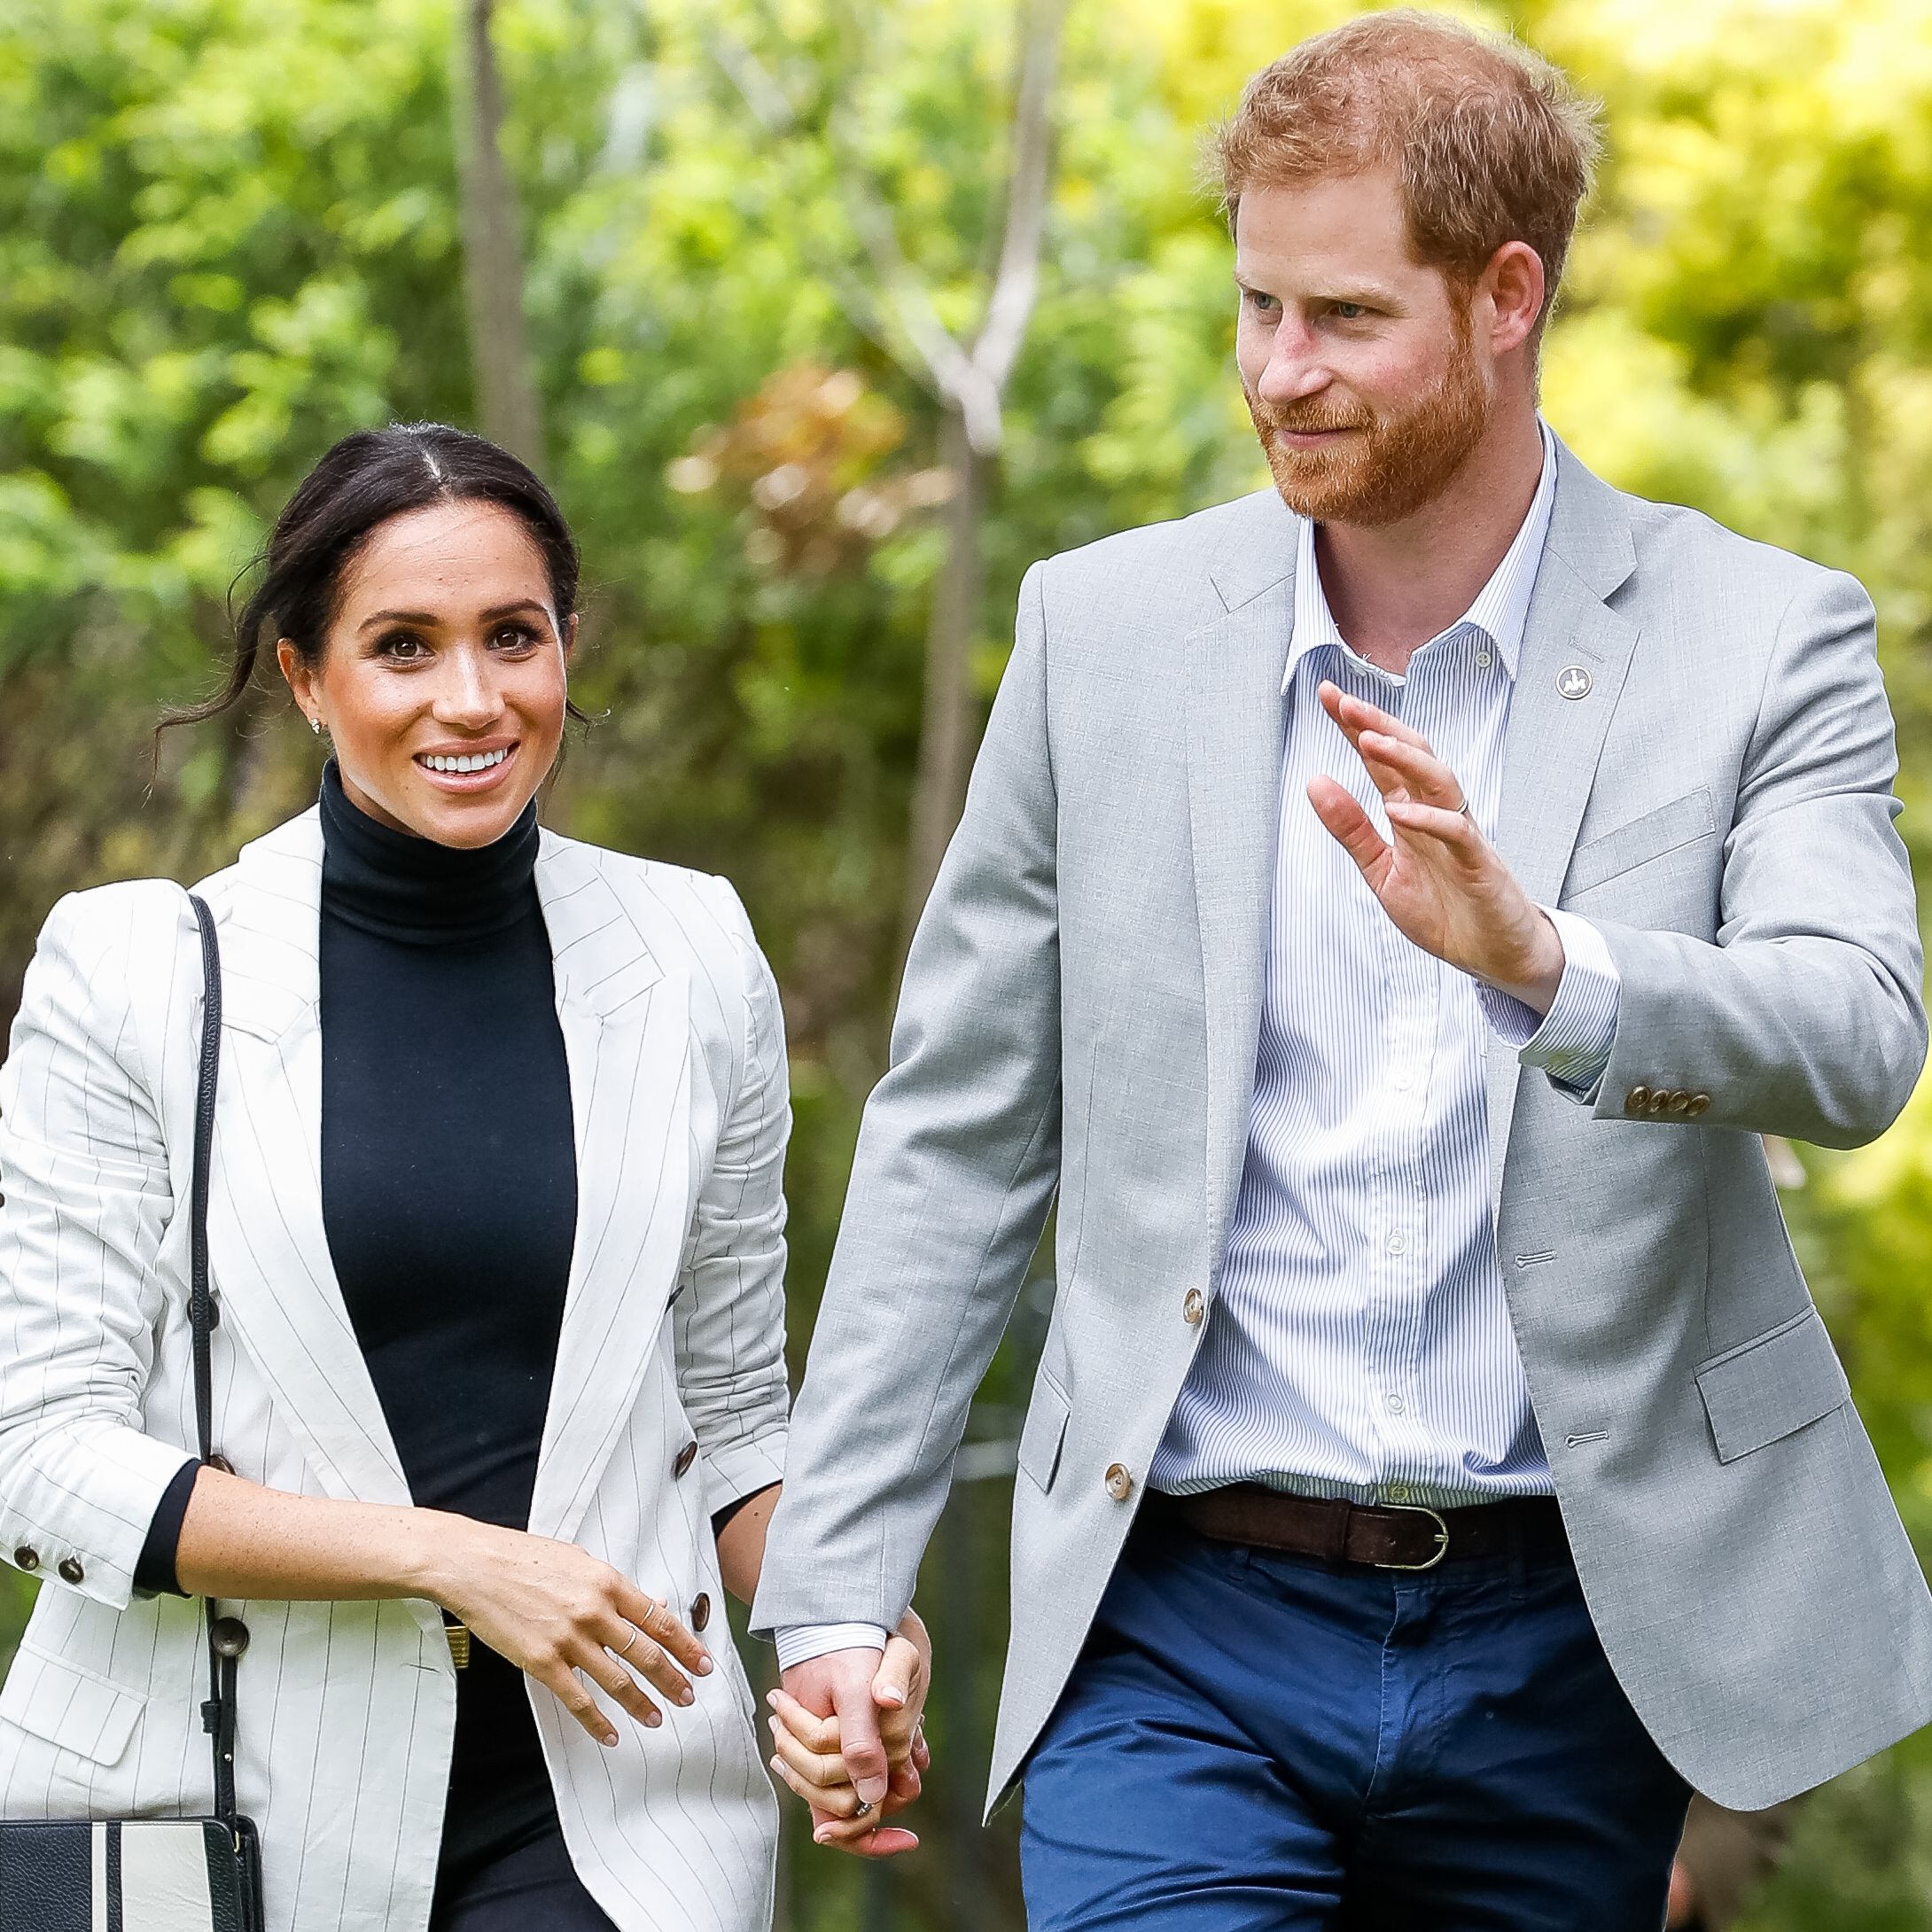 Harry and Meghan Plan to Stay at Frogmore Cottage When They Attend the Queen's Jubilee